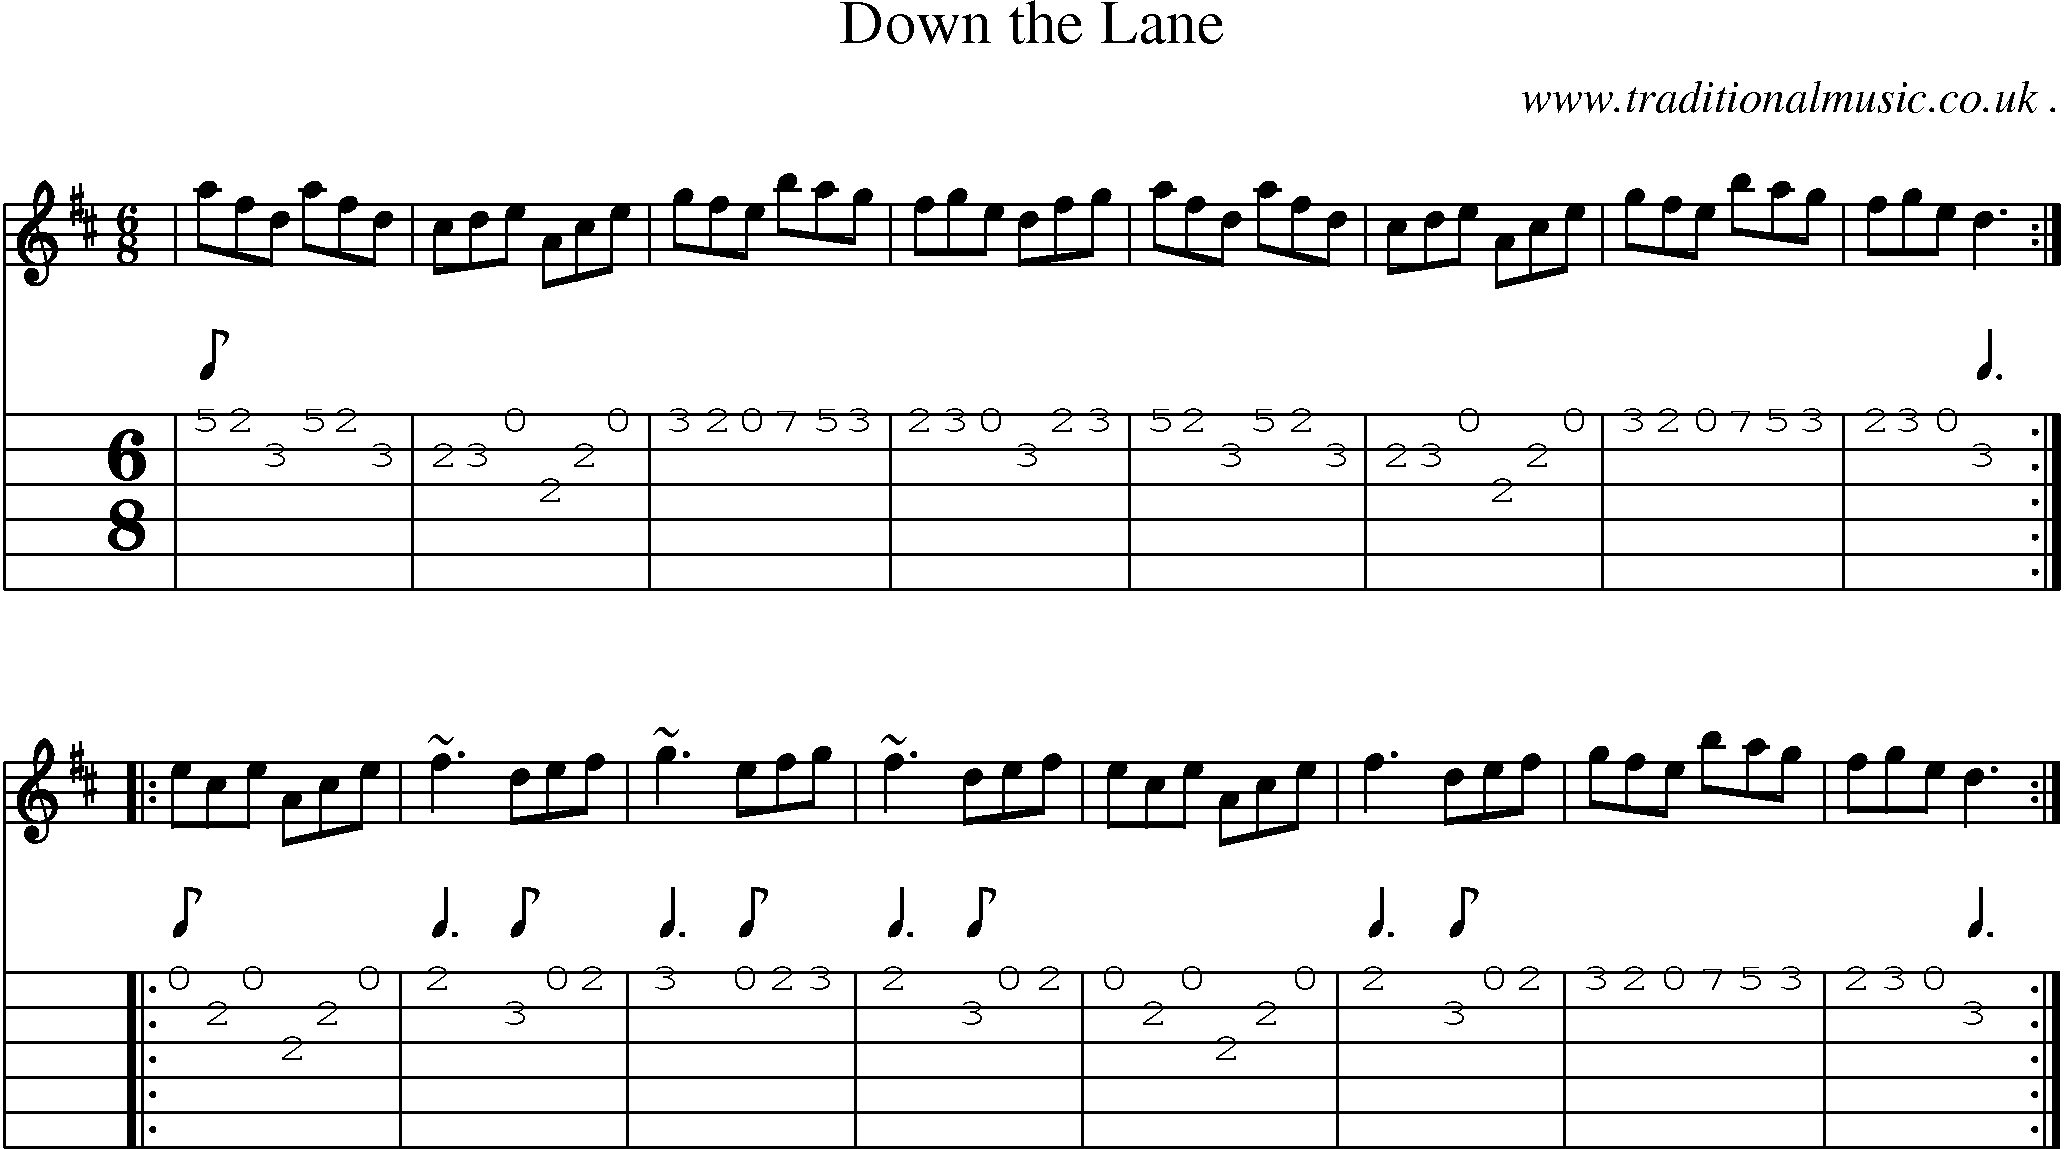 Sheet-music  score, Chords and Guitar Tabs for Down The Lane